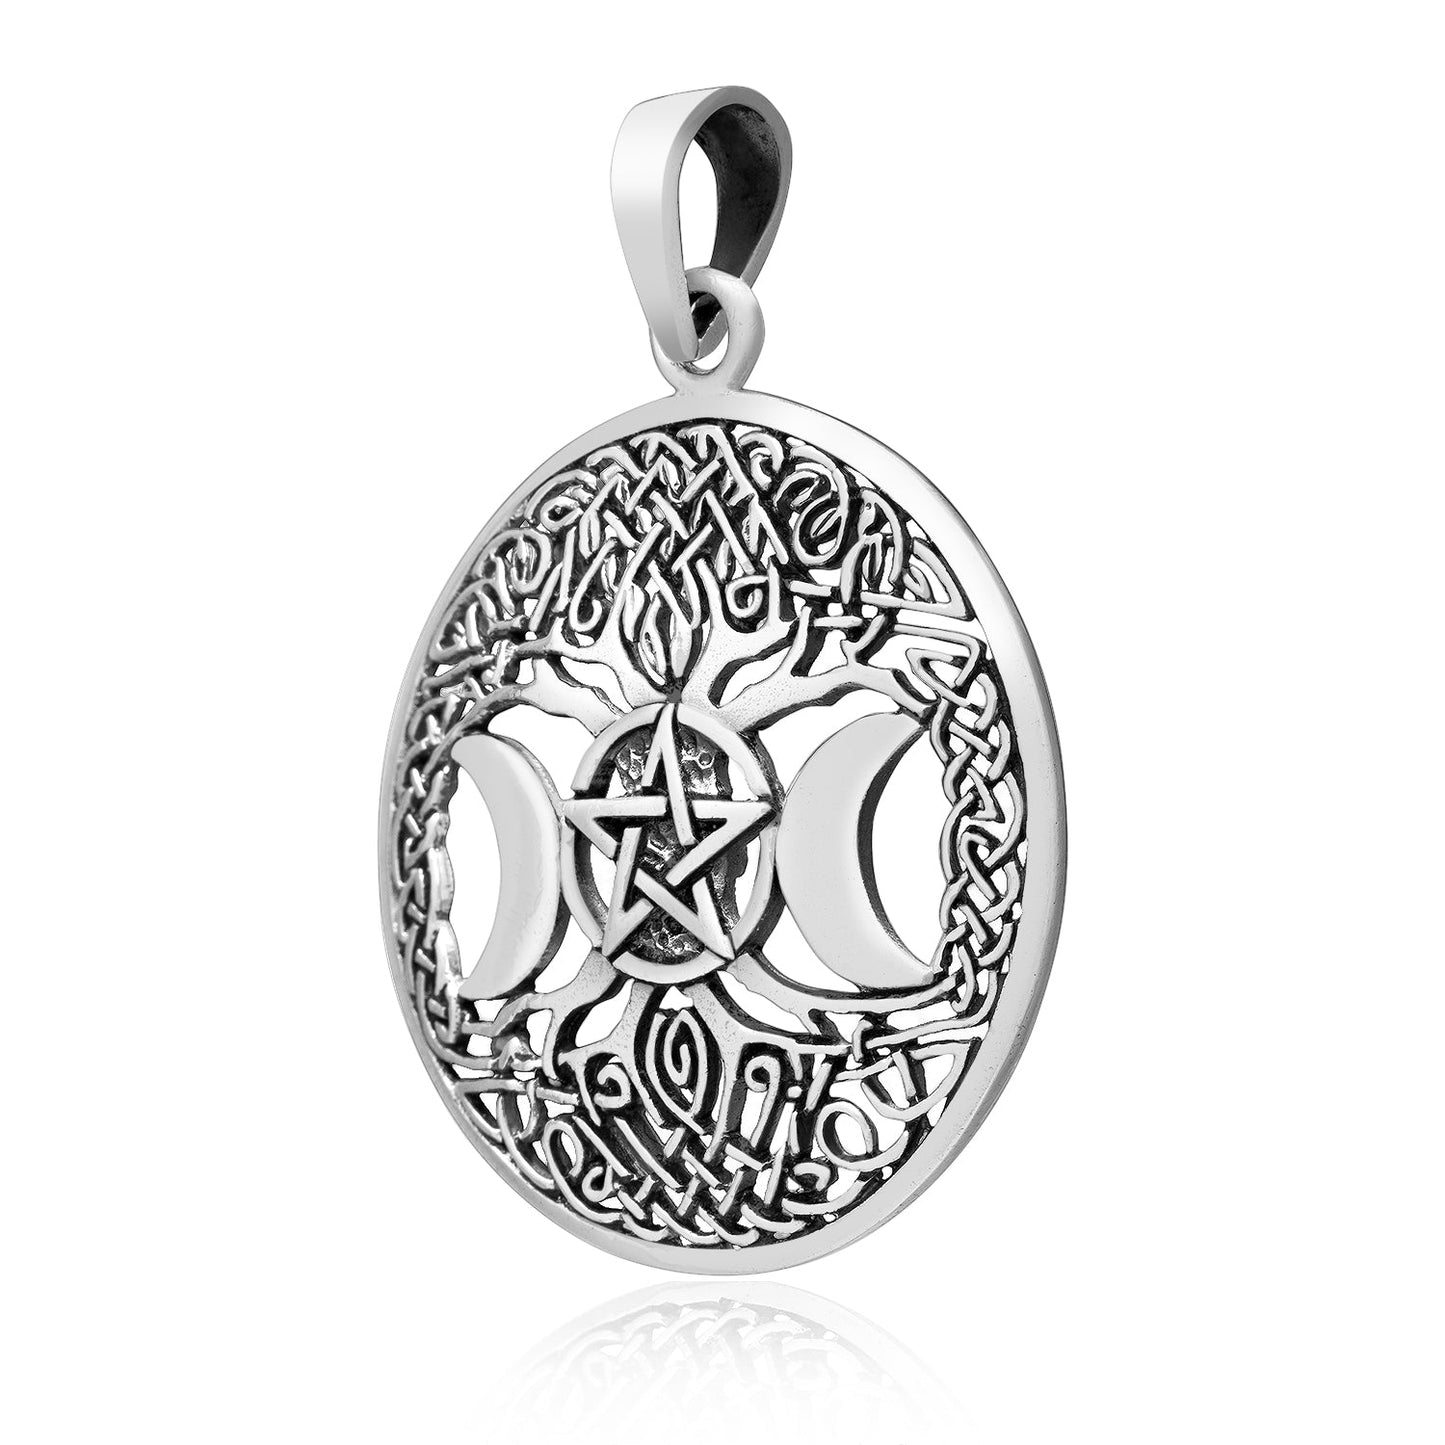 925 Sterling Silver Triple Moon Goddess Pendant with Yggdrasil - SilverMania925